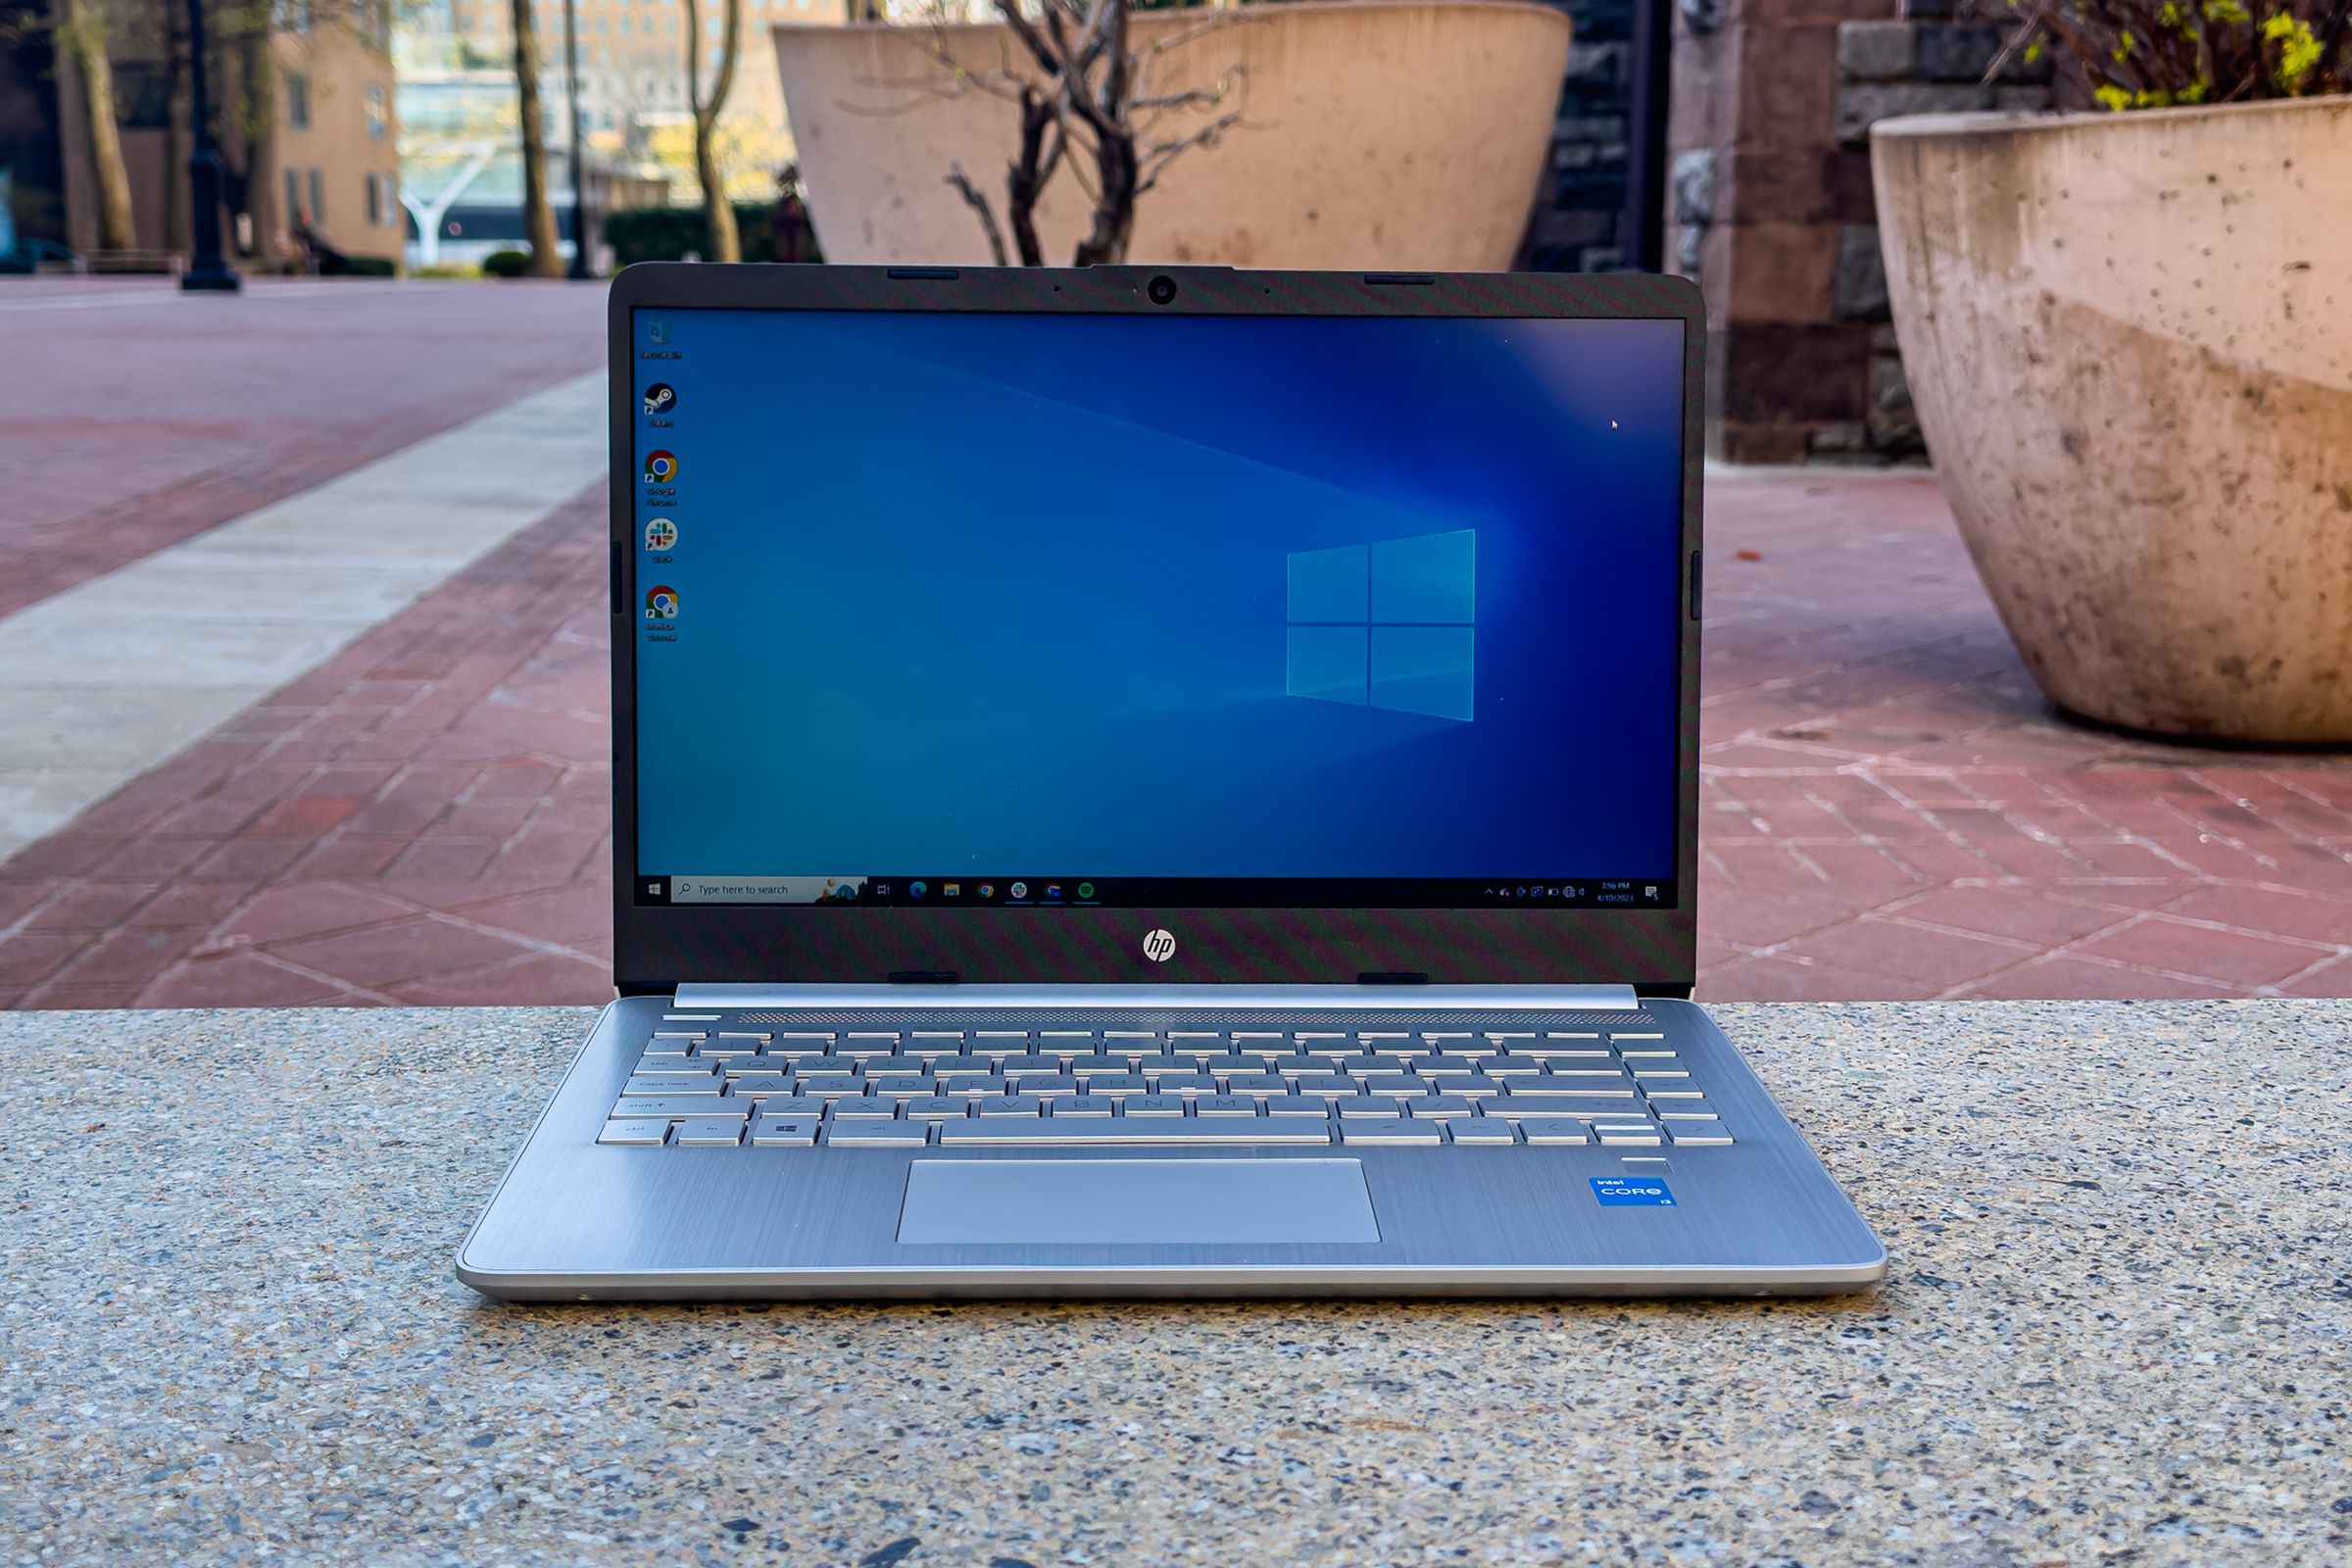 The HP 14 open in an outdoor setting displaying the Windows default desktop background.